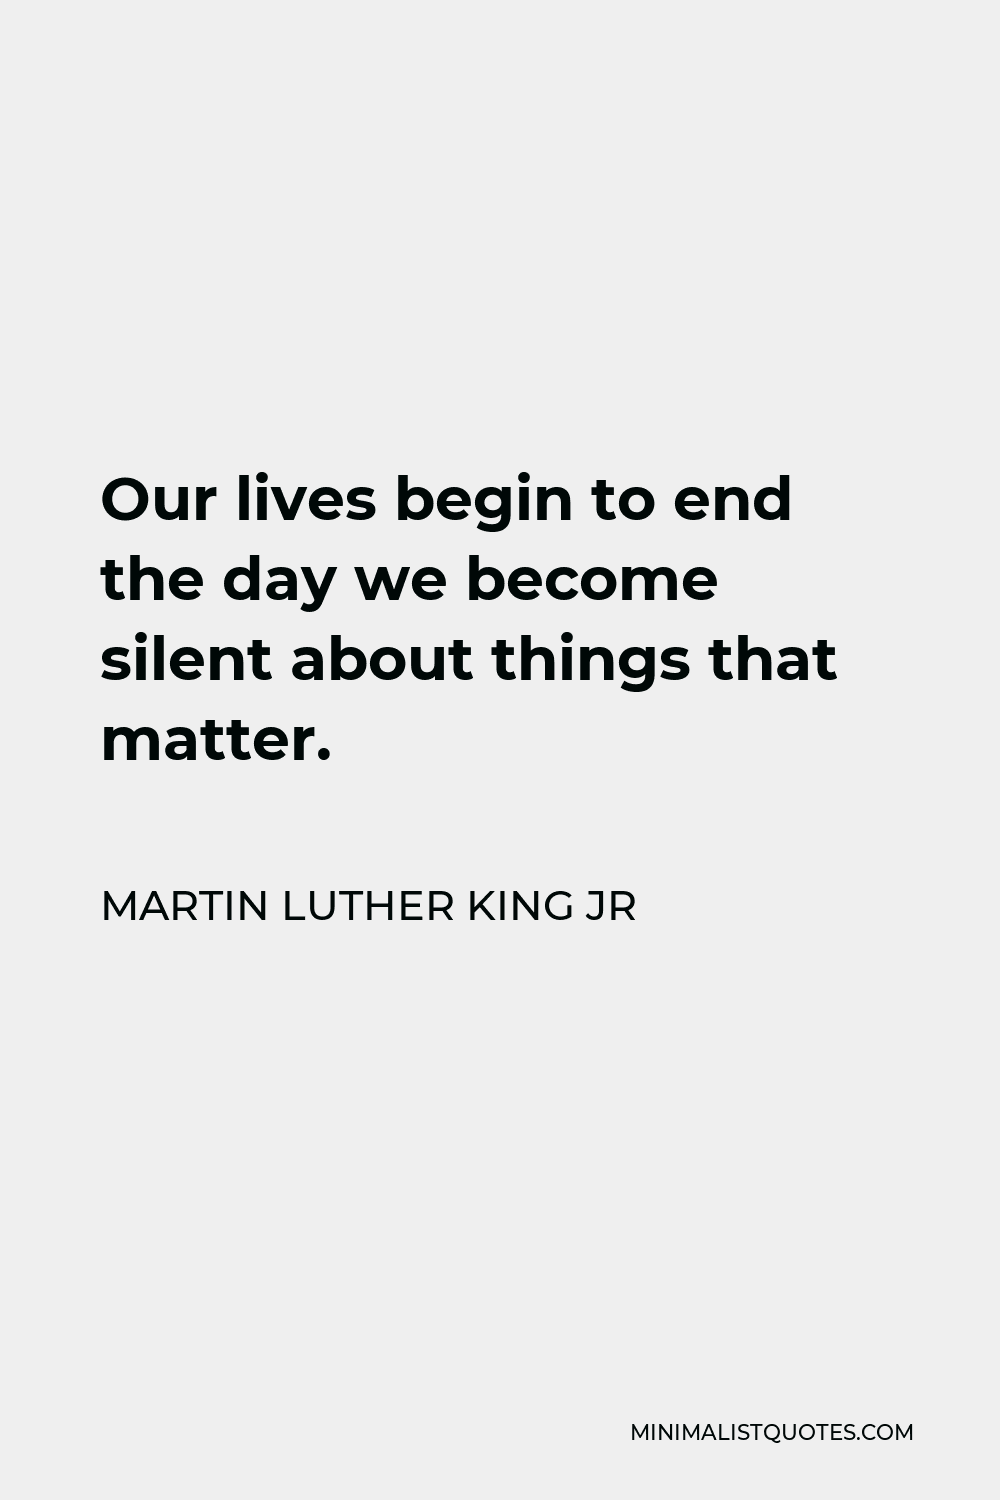 Martin Luther King Jr Quote - Our lives begin to end the day we become silent about things that matter.